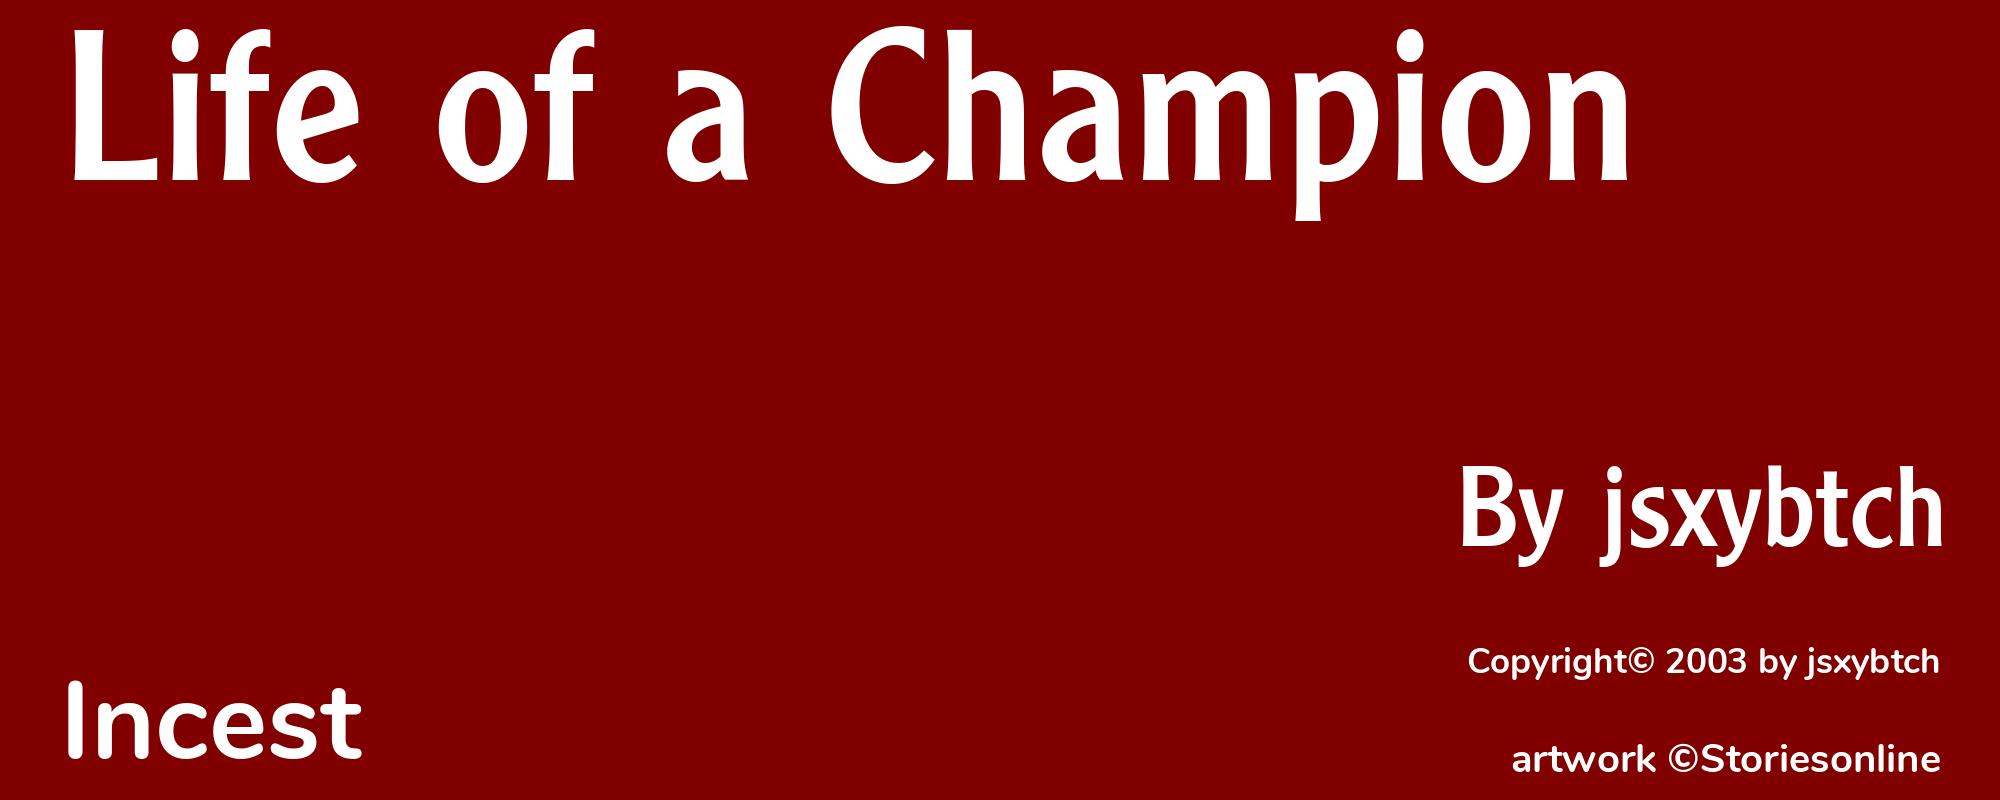 Life of a Champion - Cover